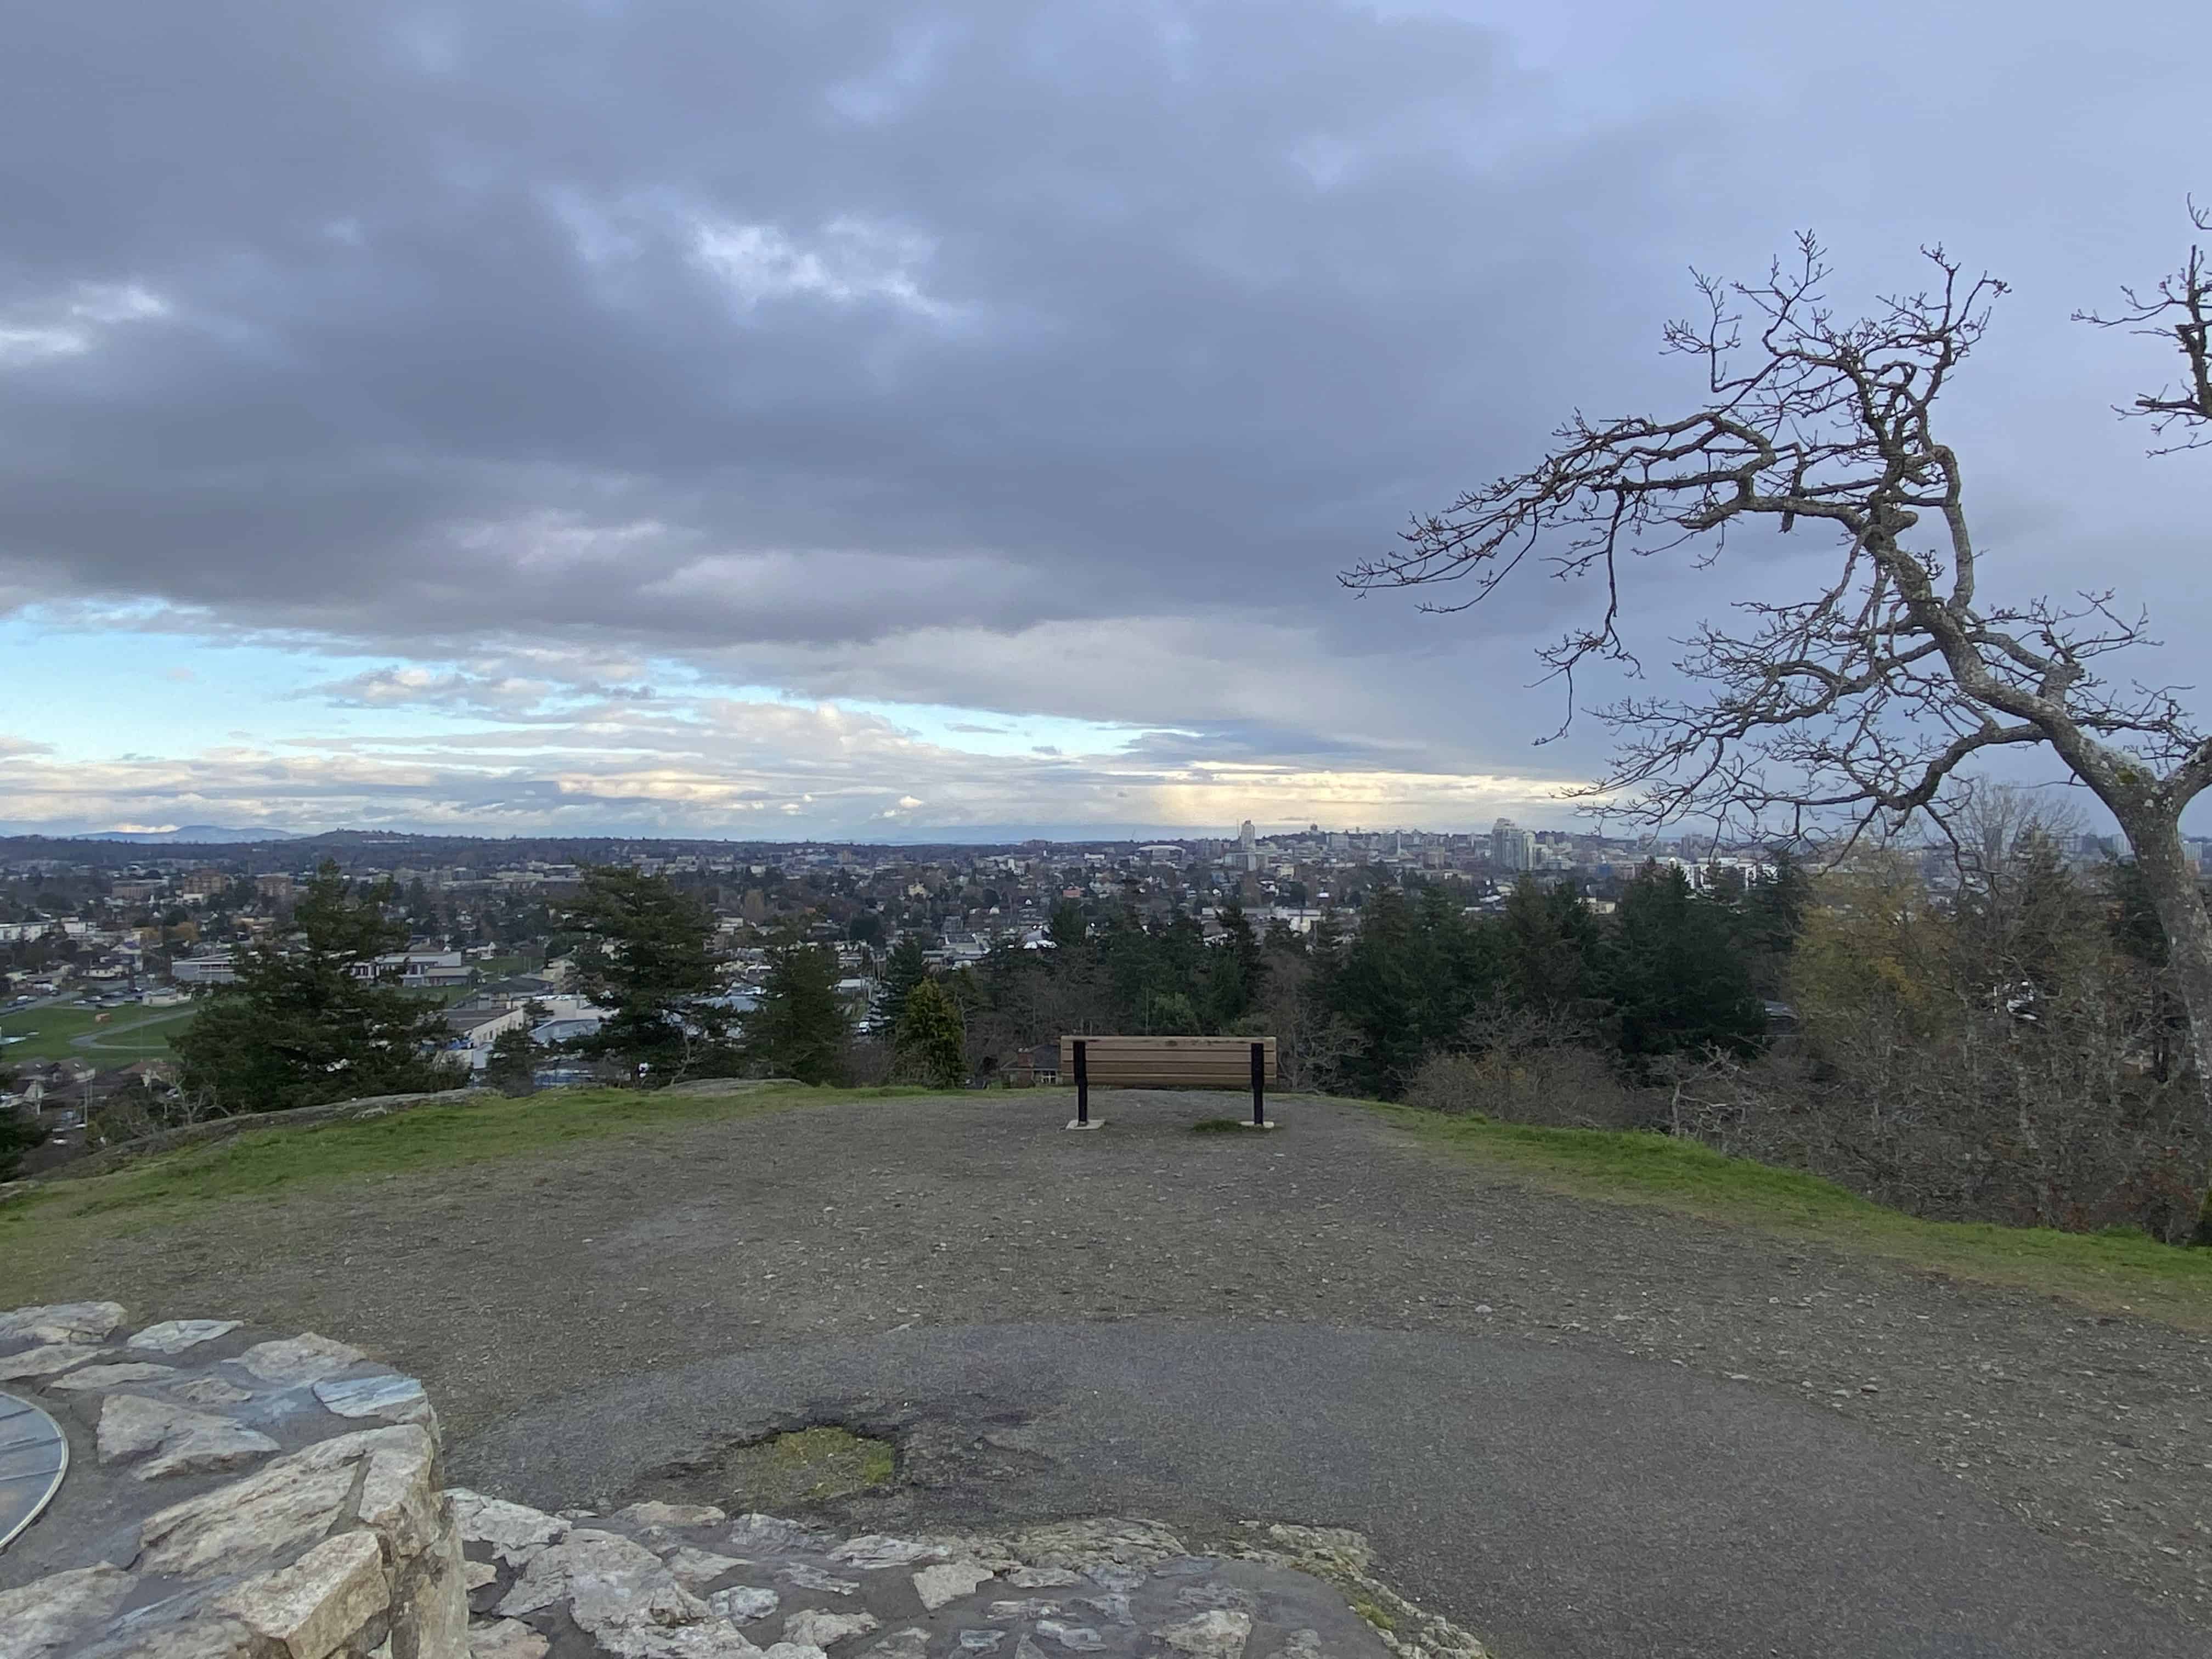 Visiting Highrock Park - Highest point Things to do in Esquimalt 